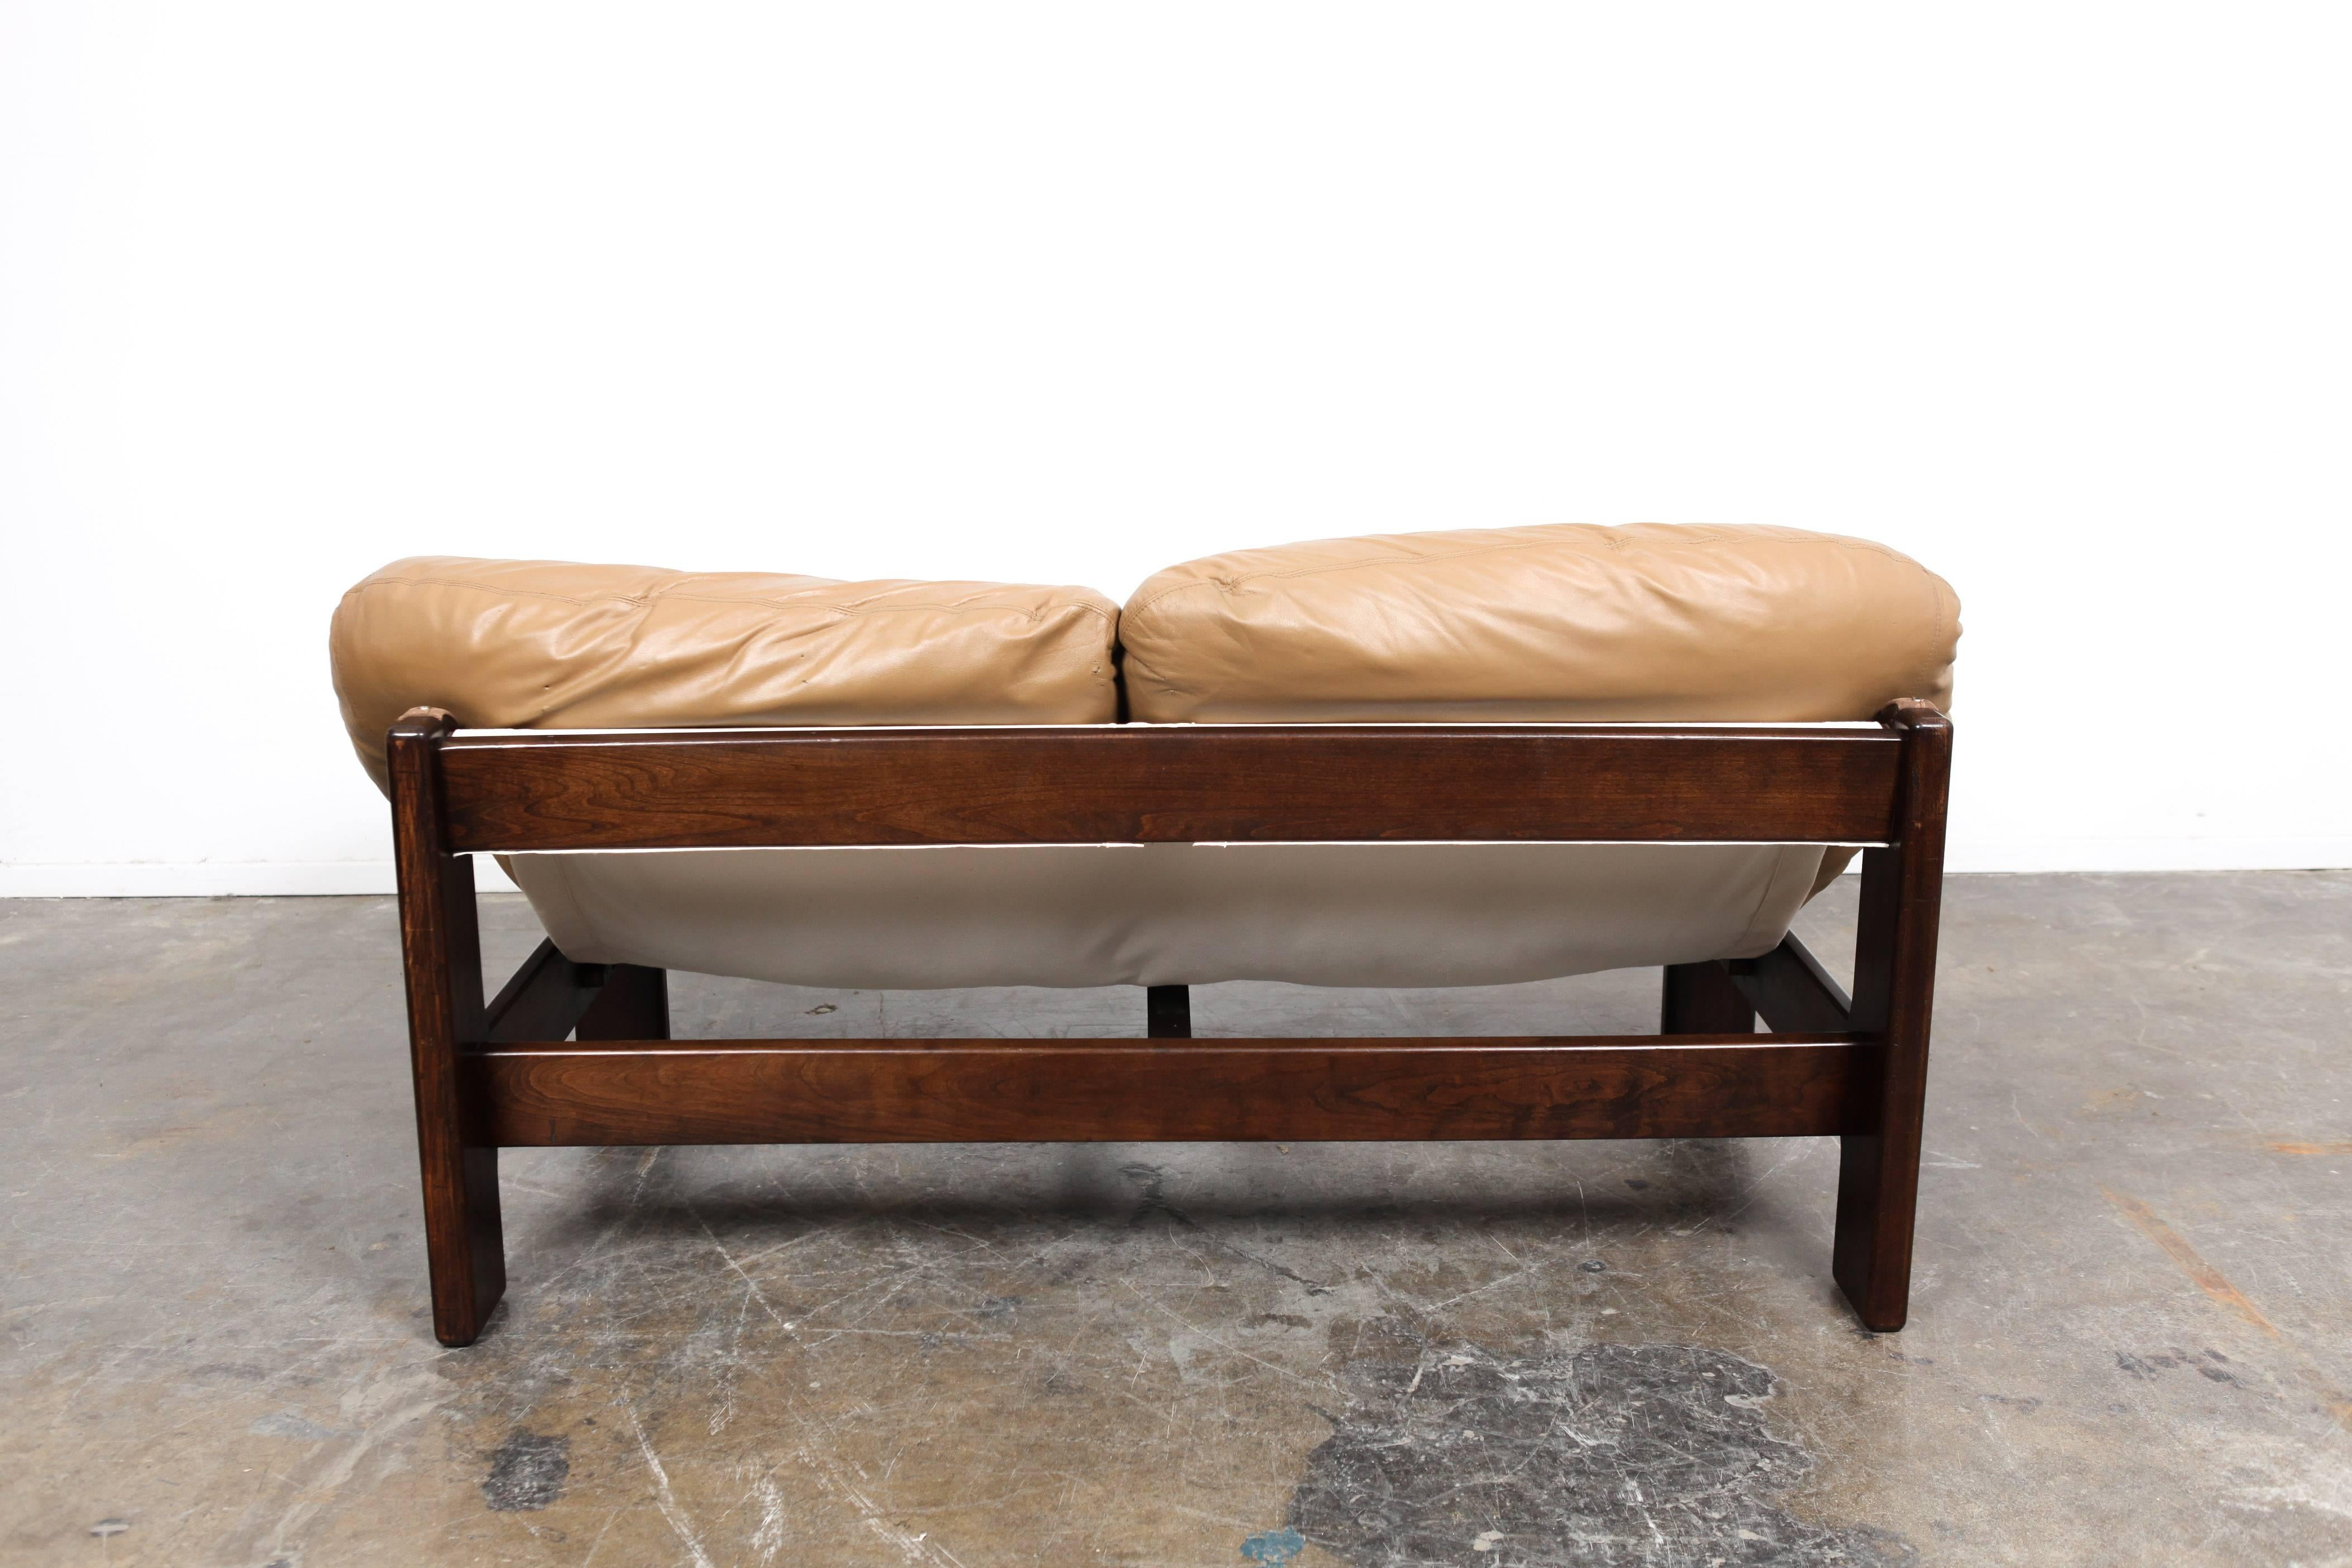 Incredible 1970s Dutch leather sofa designed by Gerard Van Den Berg. Two large cushions are supported by a canvas sling and a structural wooden frame. This piece appears to be influenced by similar Brazilian Mid-Century modern designs.